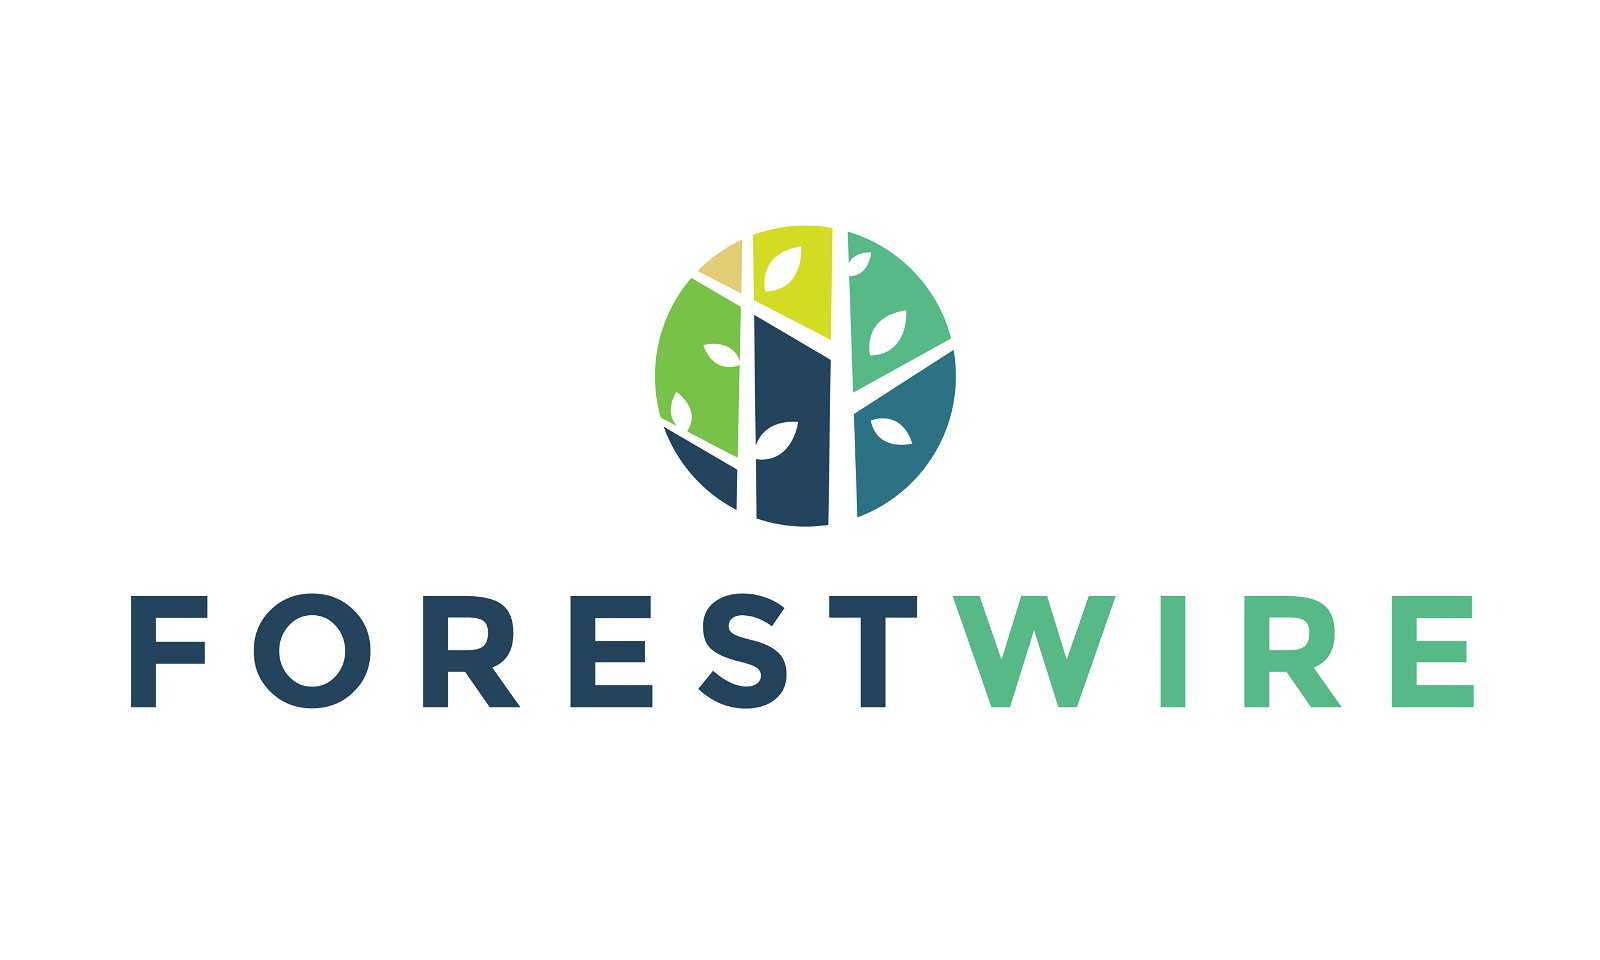 ForestWire.com - Creative brandable domain for sale